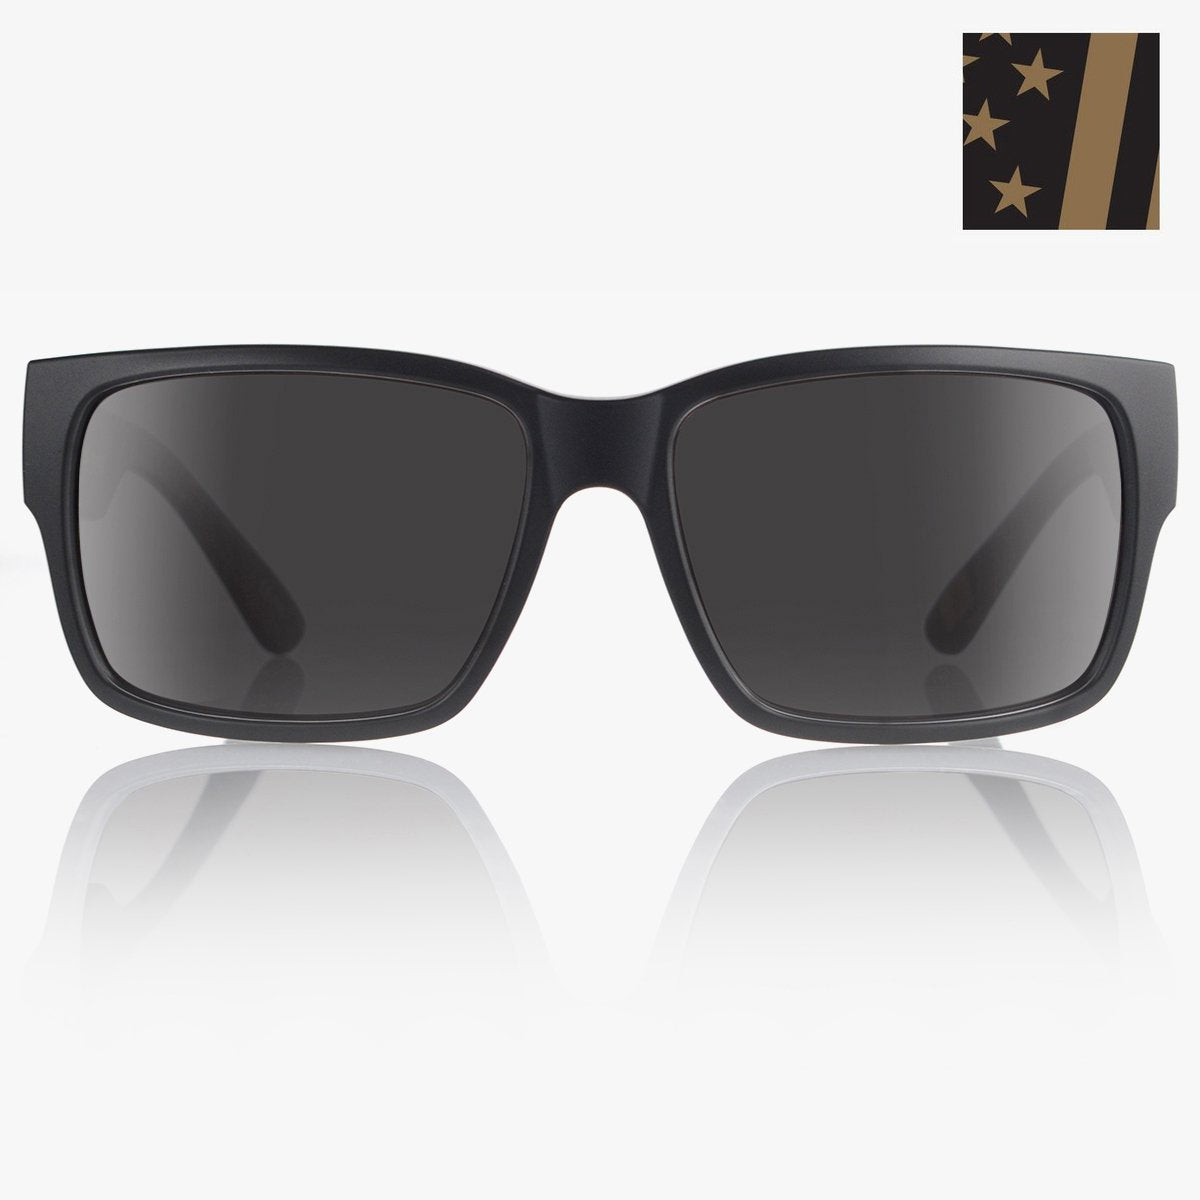 black sunglasses for men with big heads